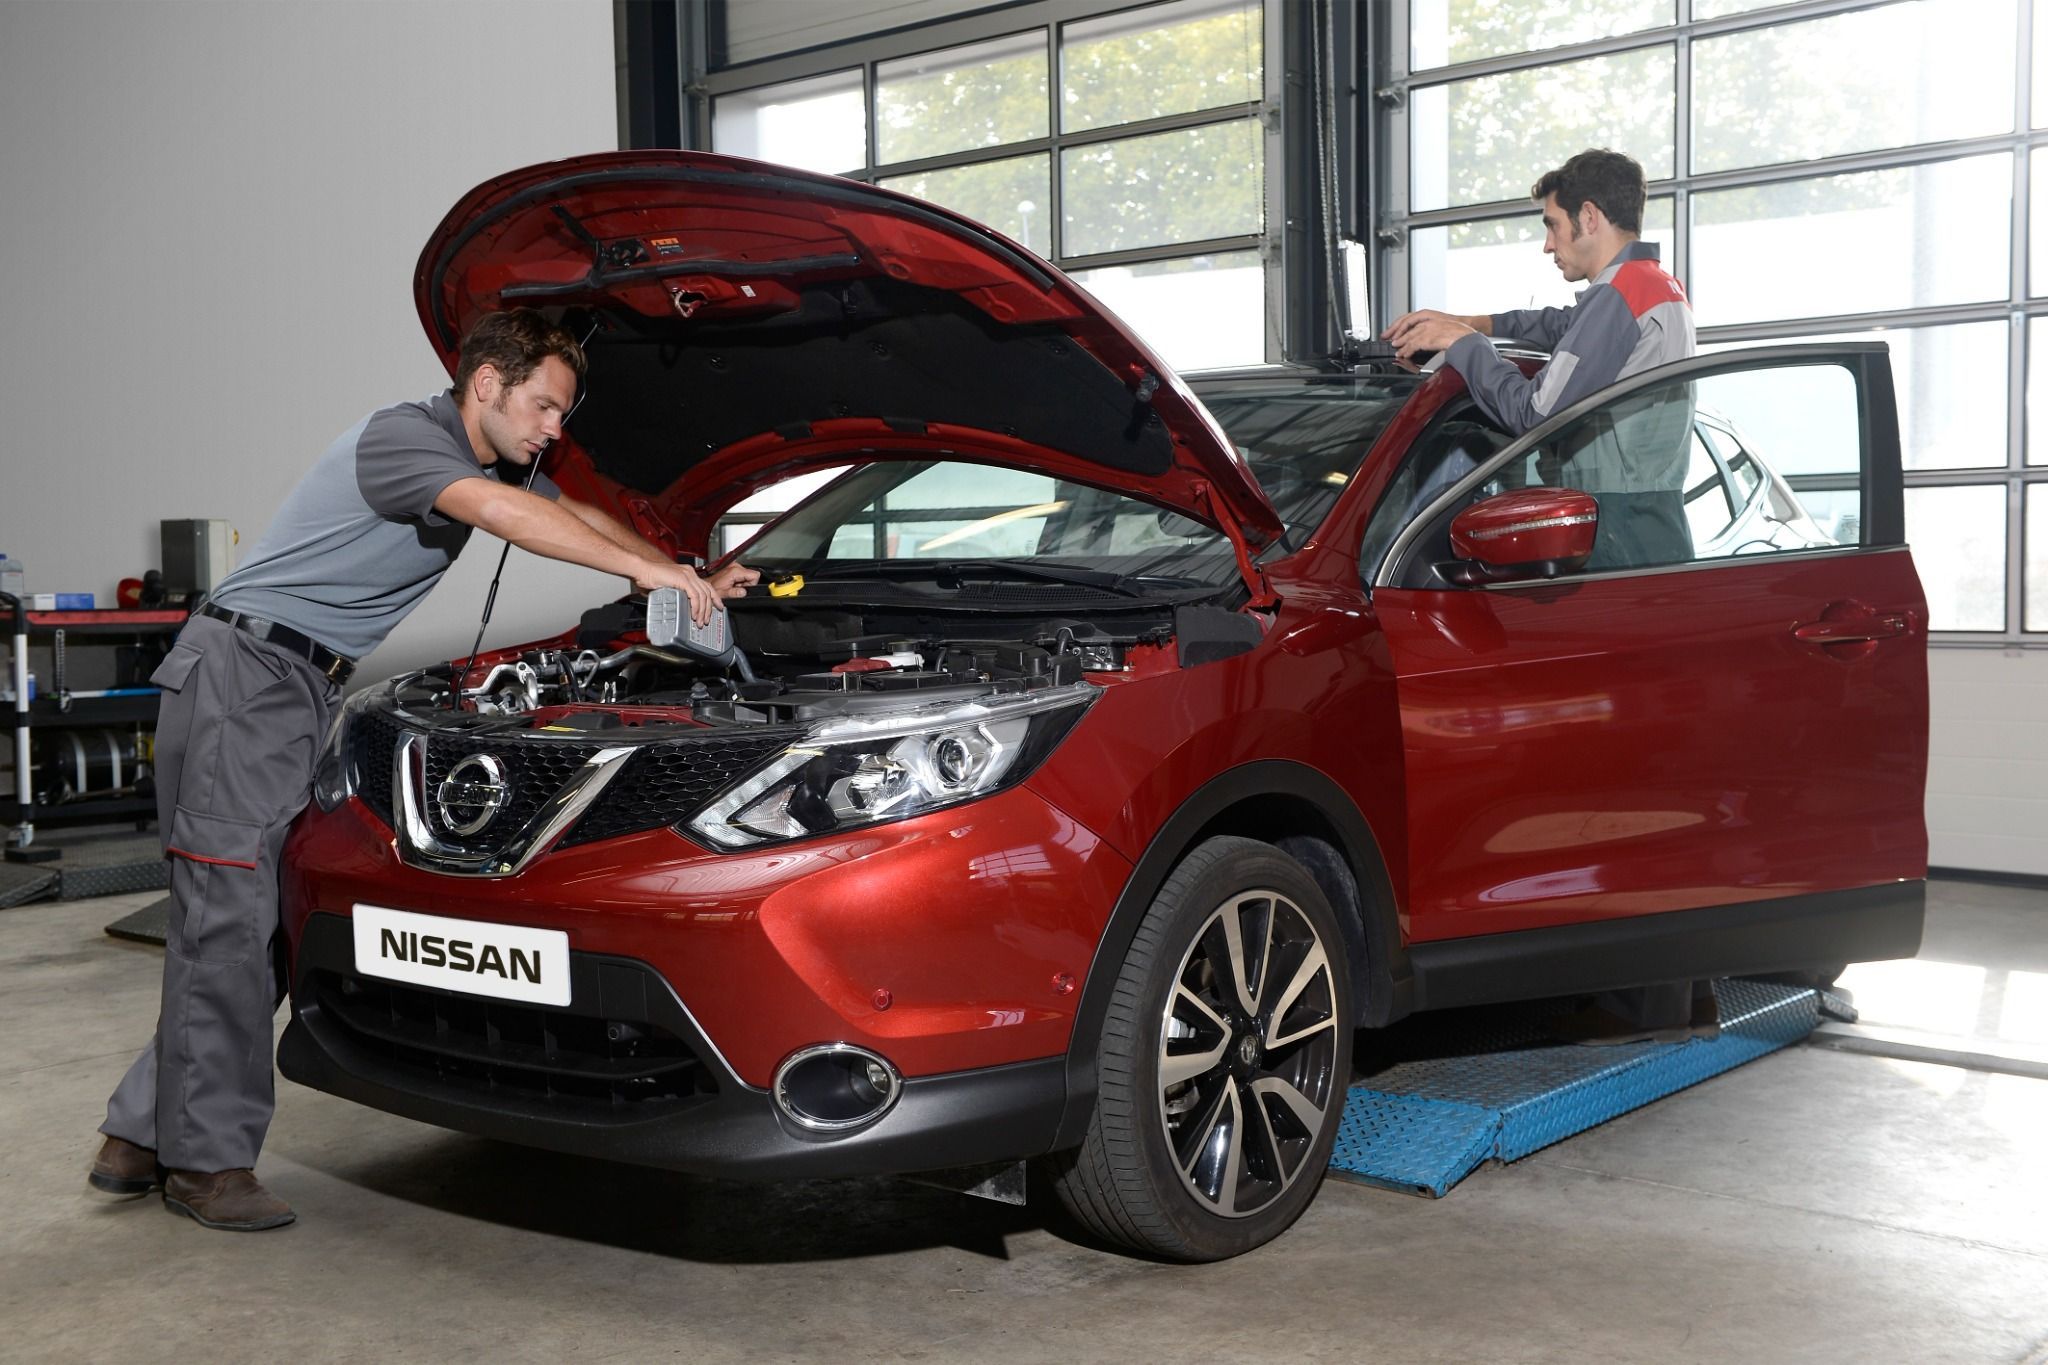 Technicians working on a Nissan